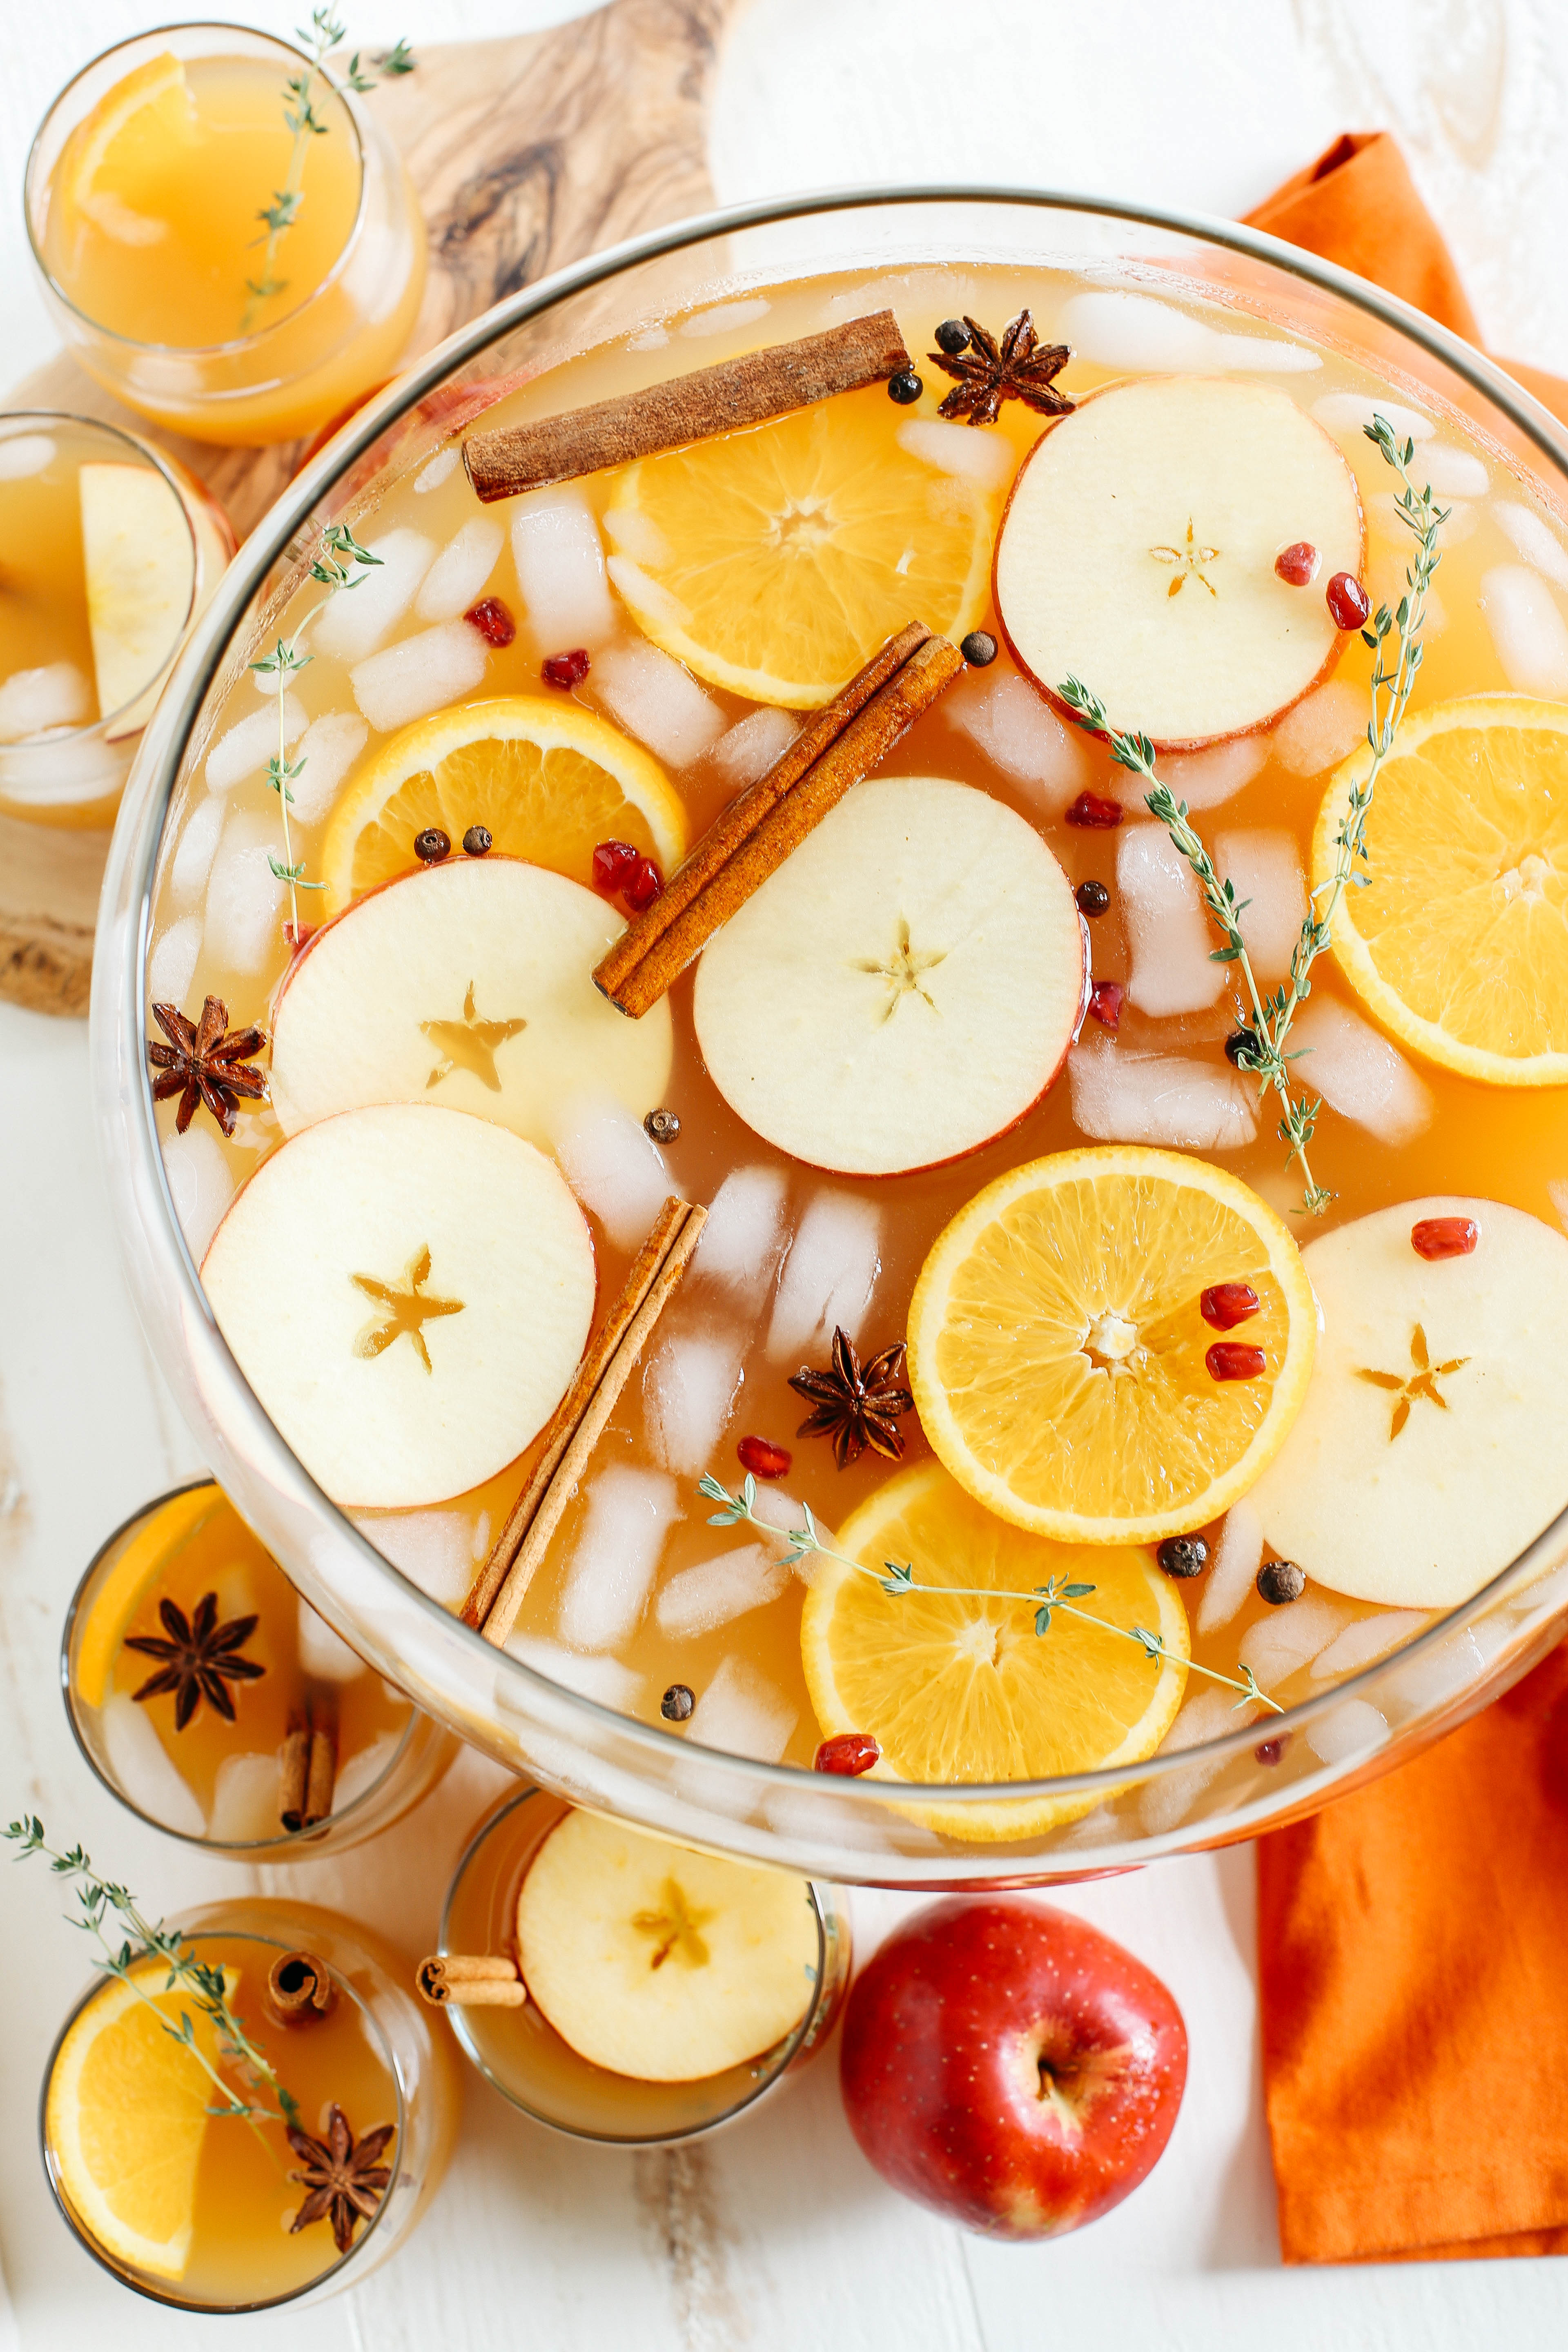 This Harvest Apple Cider Punch makes the perfect addition to any holiday party or gathering with a delicious combination of your favorite fall flavors all marinated together in one festive cocktail!